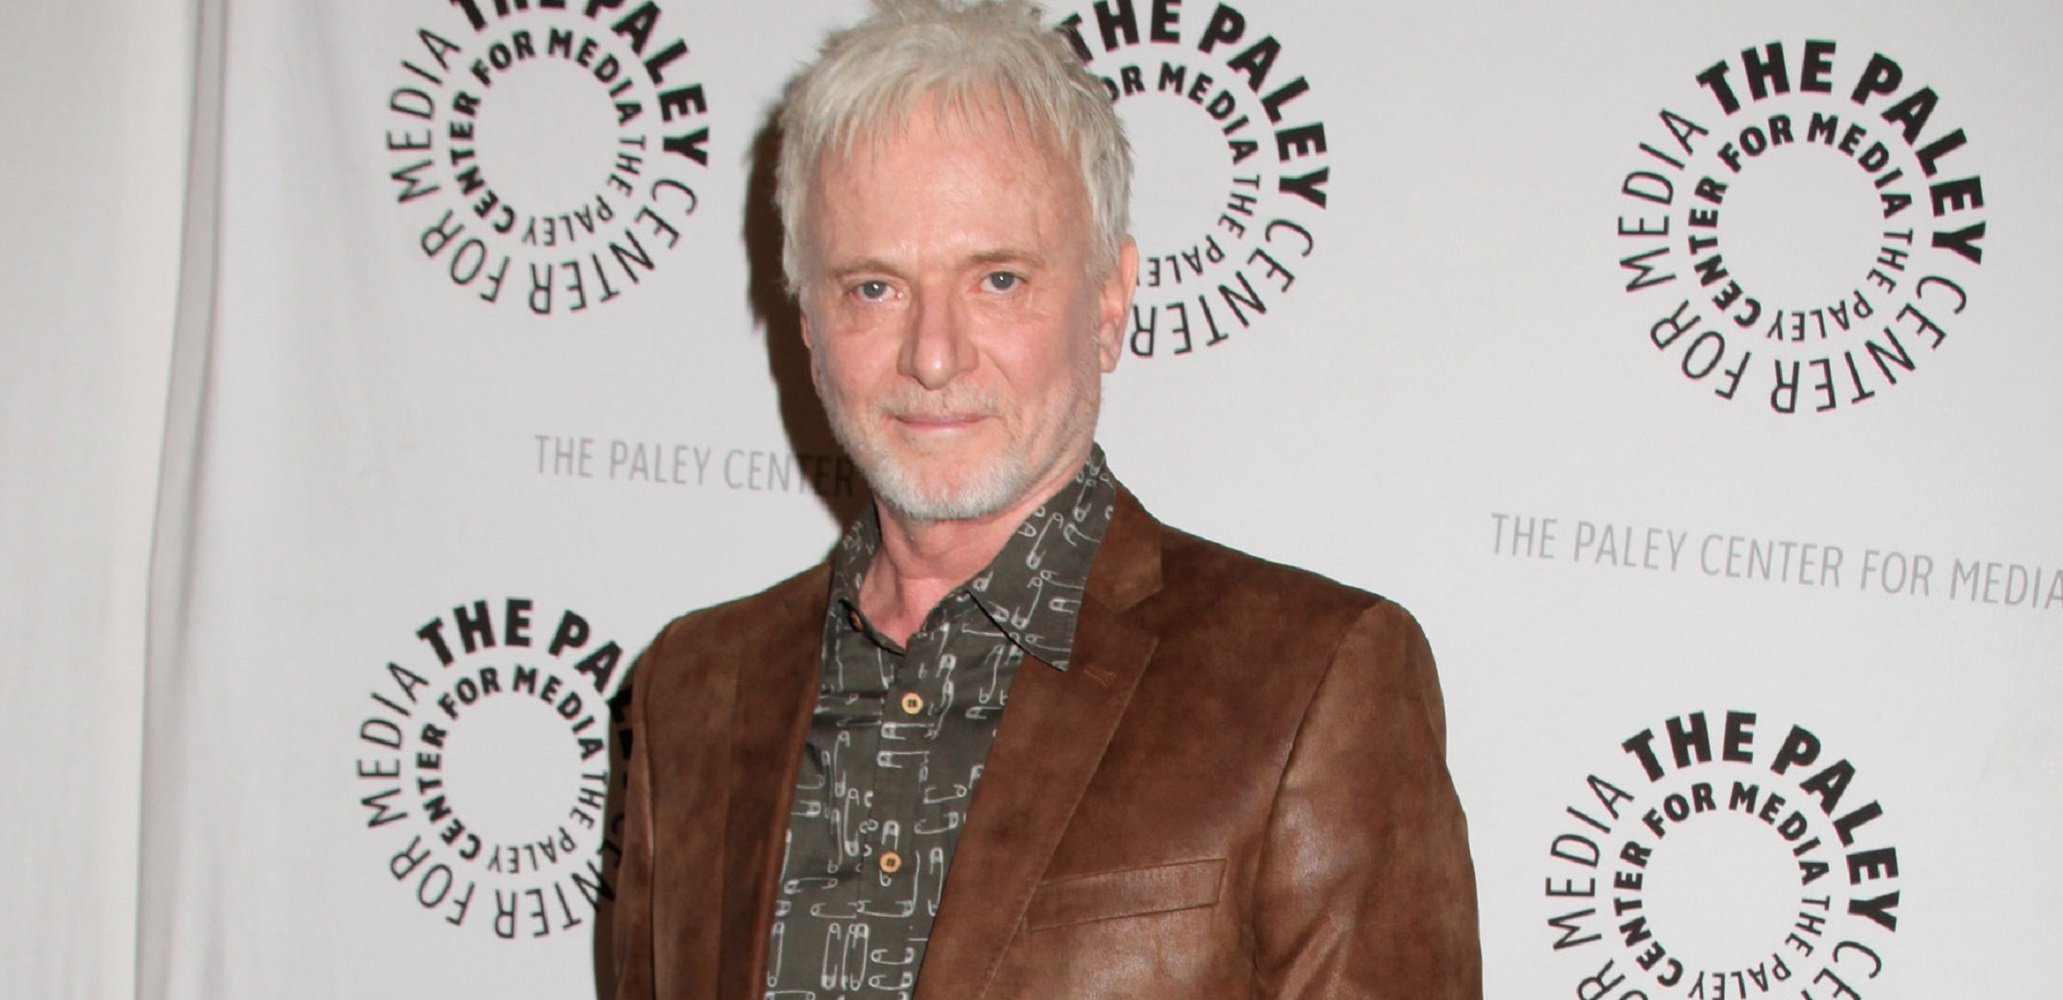 General Hospital actor Anthony Geary, pictured here in a tweed jacket, returns